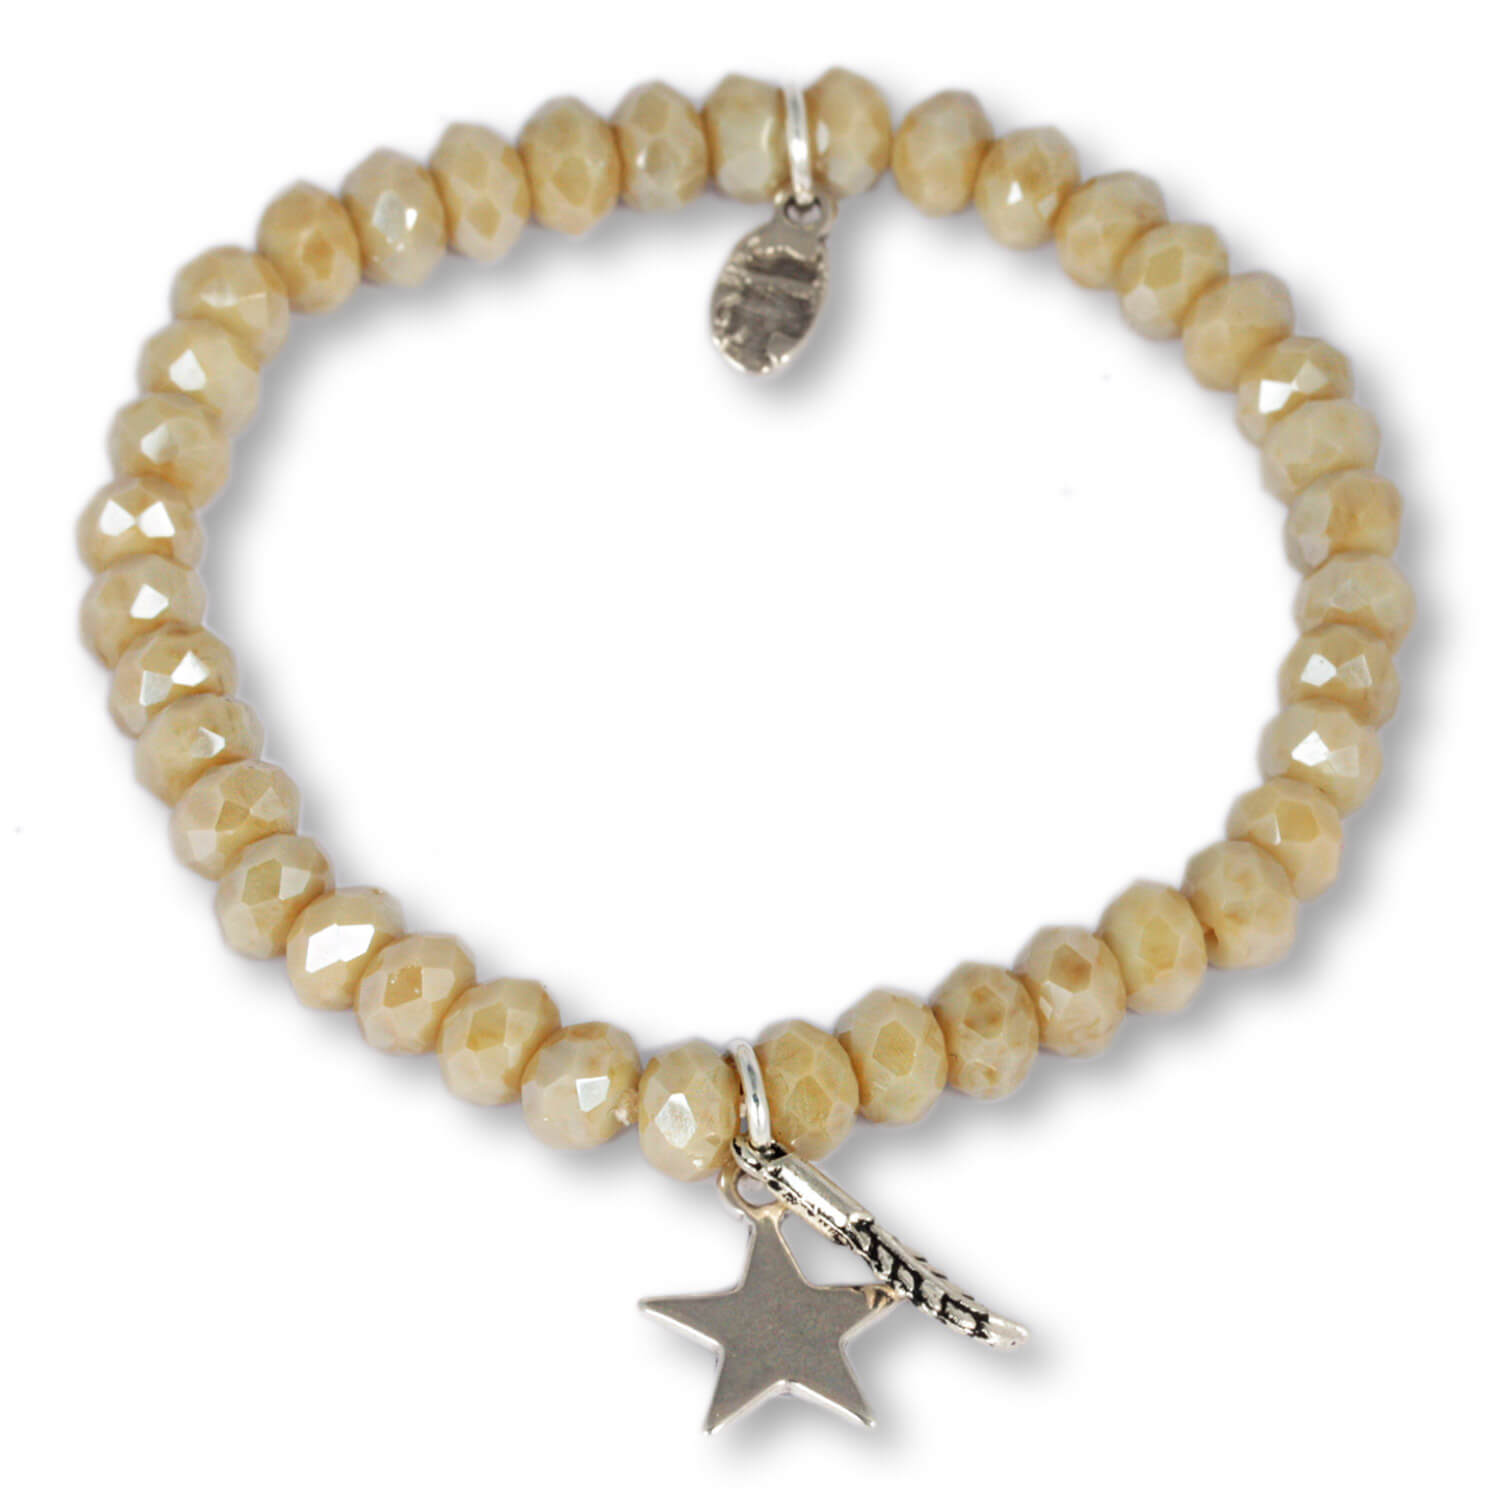 Caribic Blue Desertsand Glow- crystal bracelet with feather and star